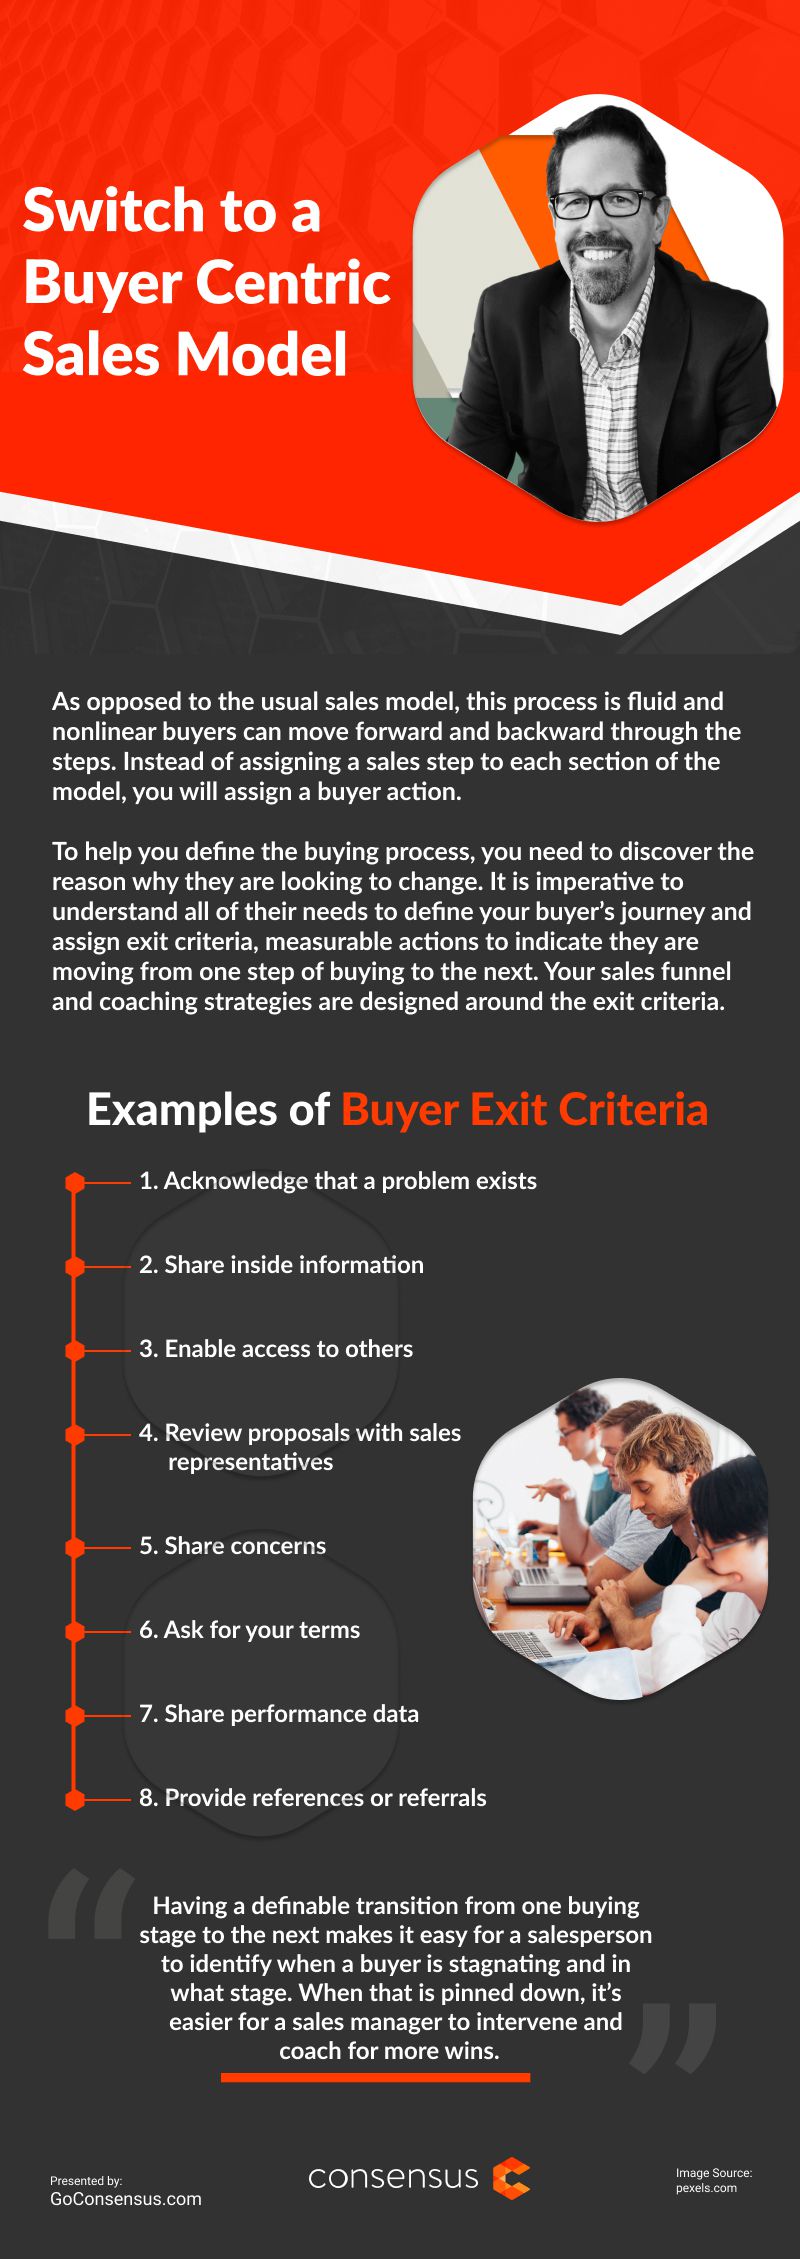 Switch to a Buyer Centric Sales Model Infographic